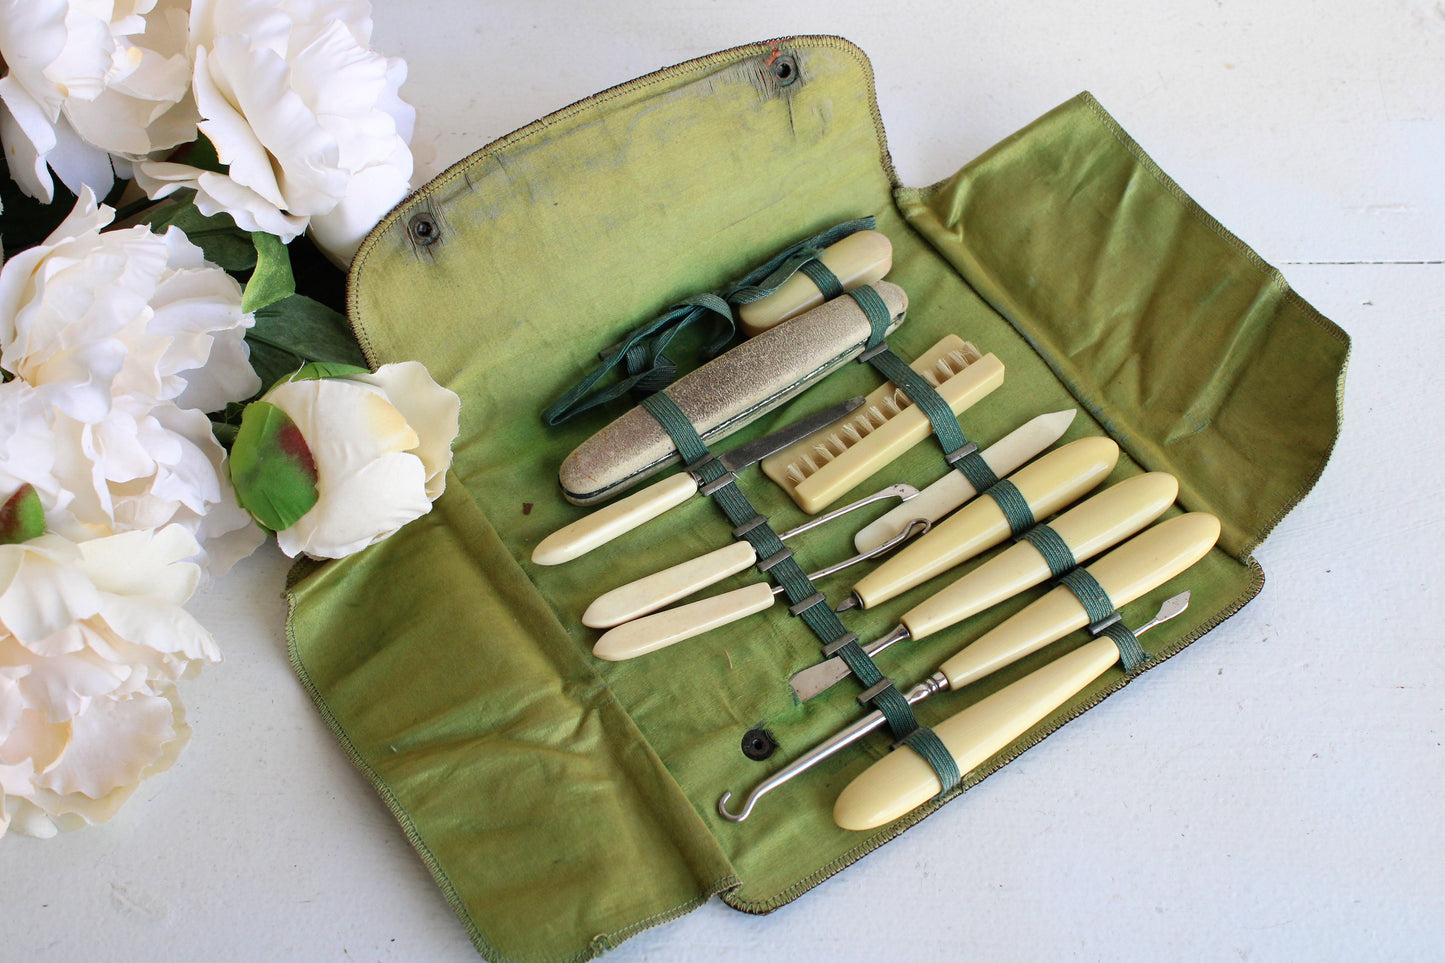 Vintage 1920s 1930s Grooming Kit,  Art Deco Black Leather with Green Silk Lining